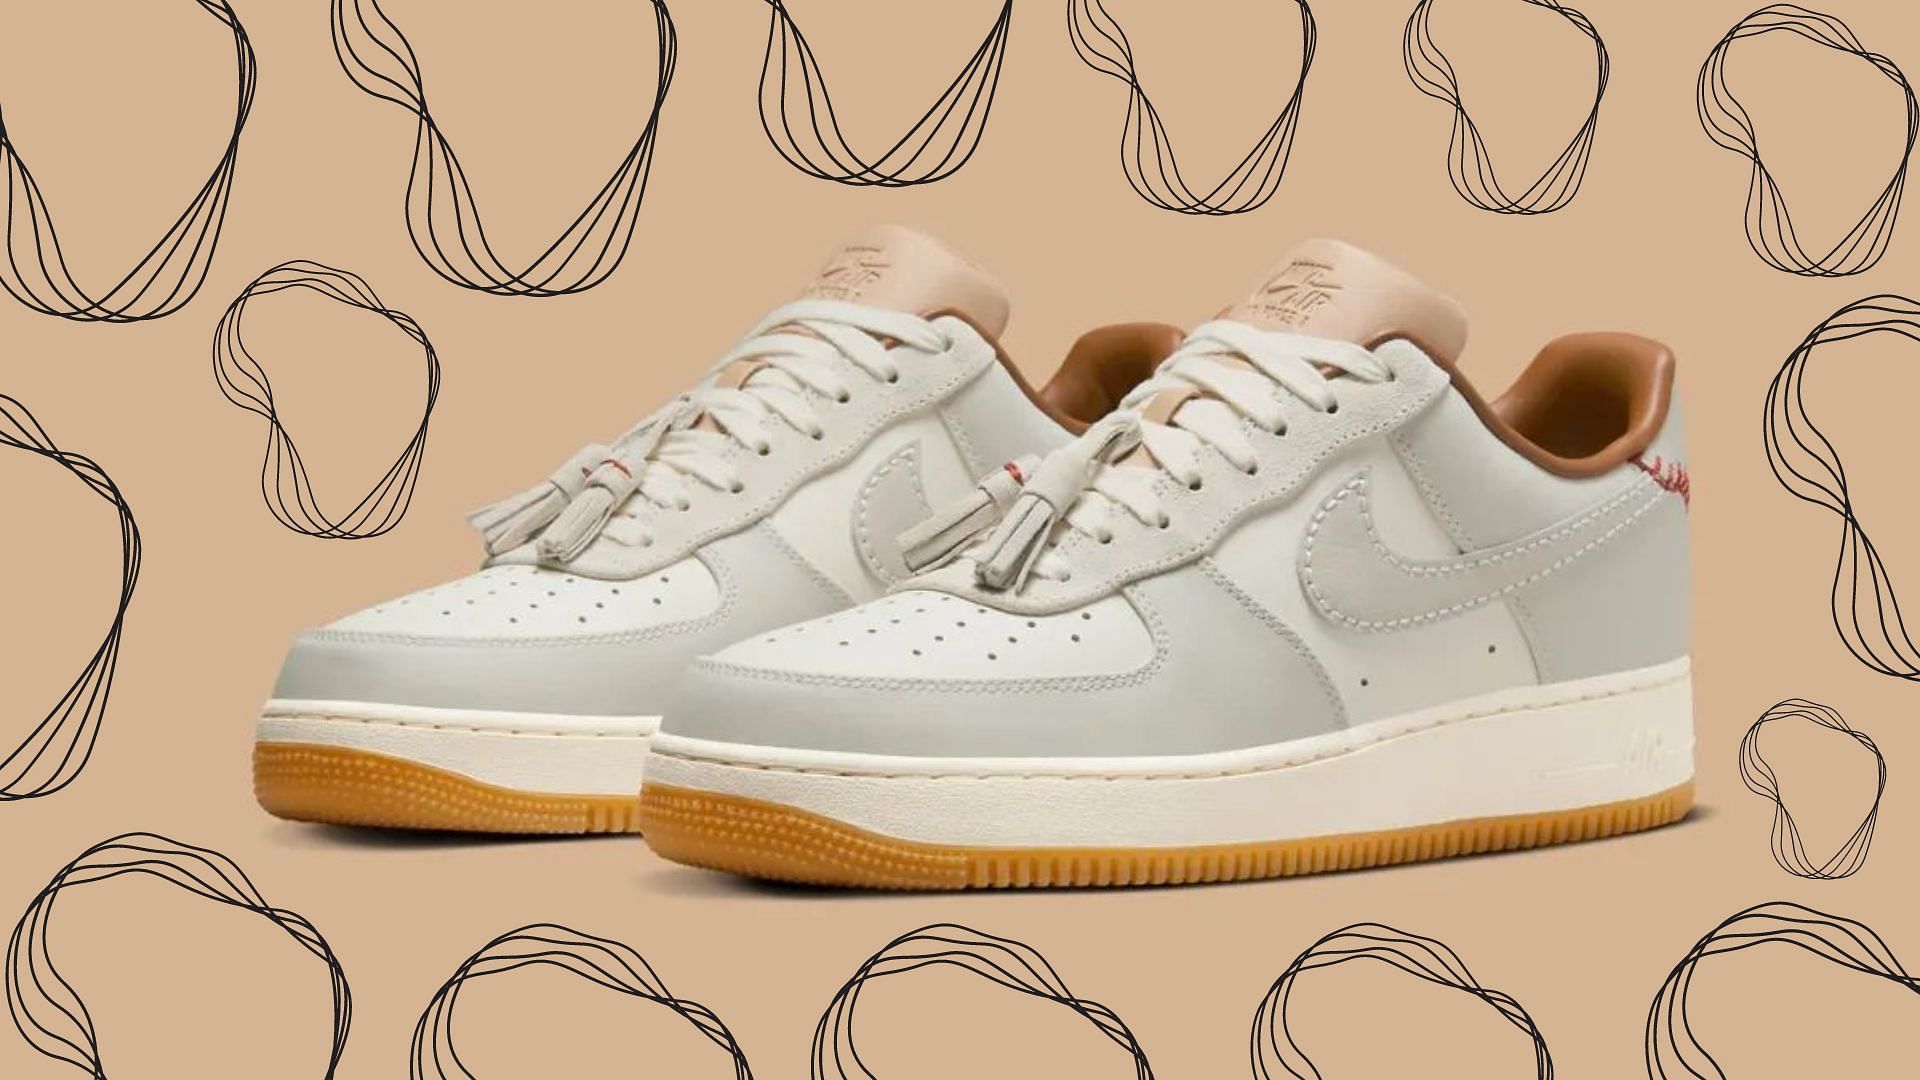 Nike Air Force 1 Low Leather Tassels (Image via YouTube/@inboxtogo)